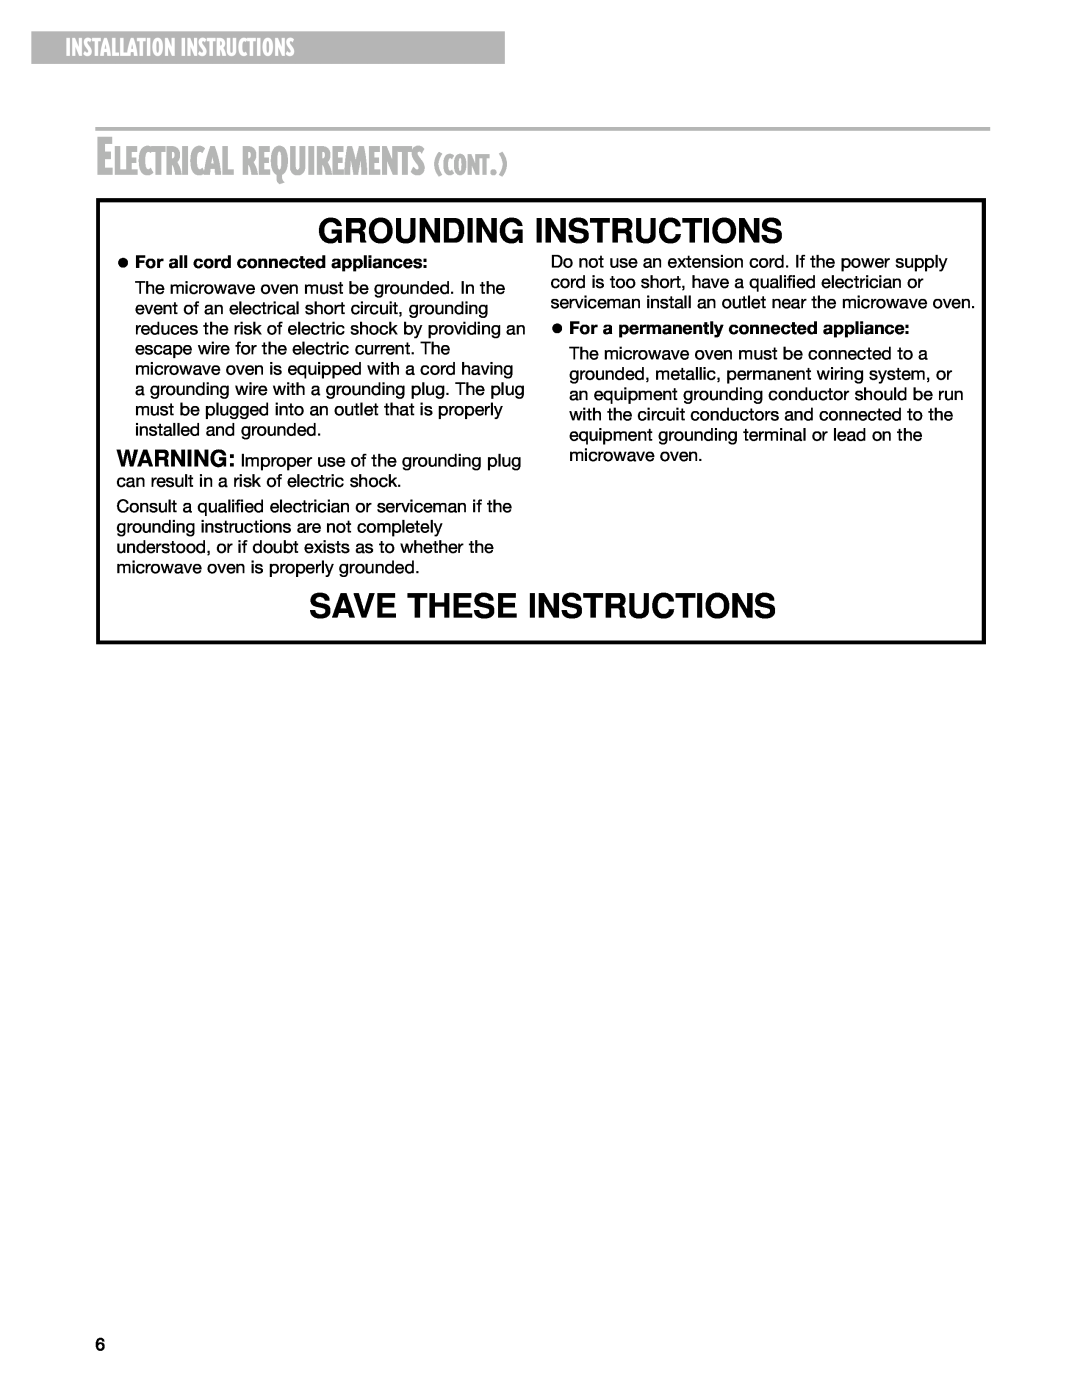 Whirlpool GM8155XJ Electrical Requirements Cont, Grounding Instructions, Installation Instructions 